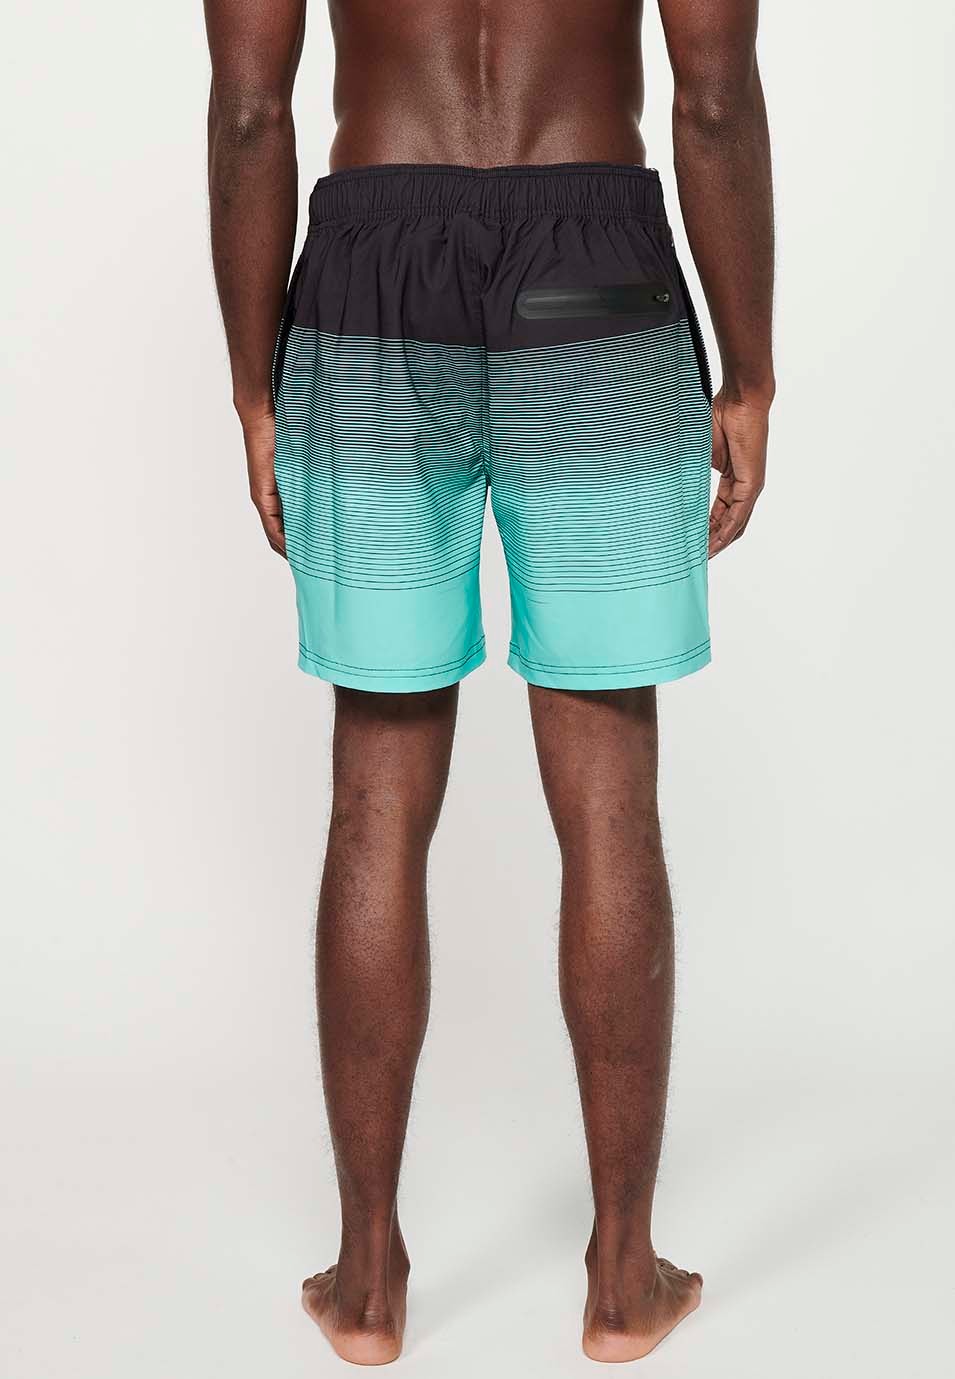 Printed swim shorts with adjustable waist, mint gradient color for men